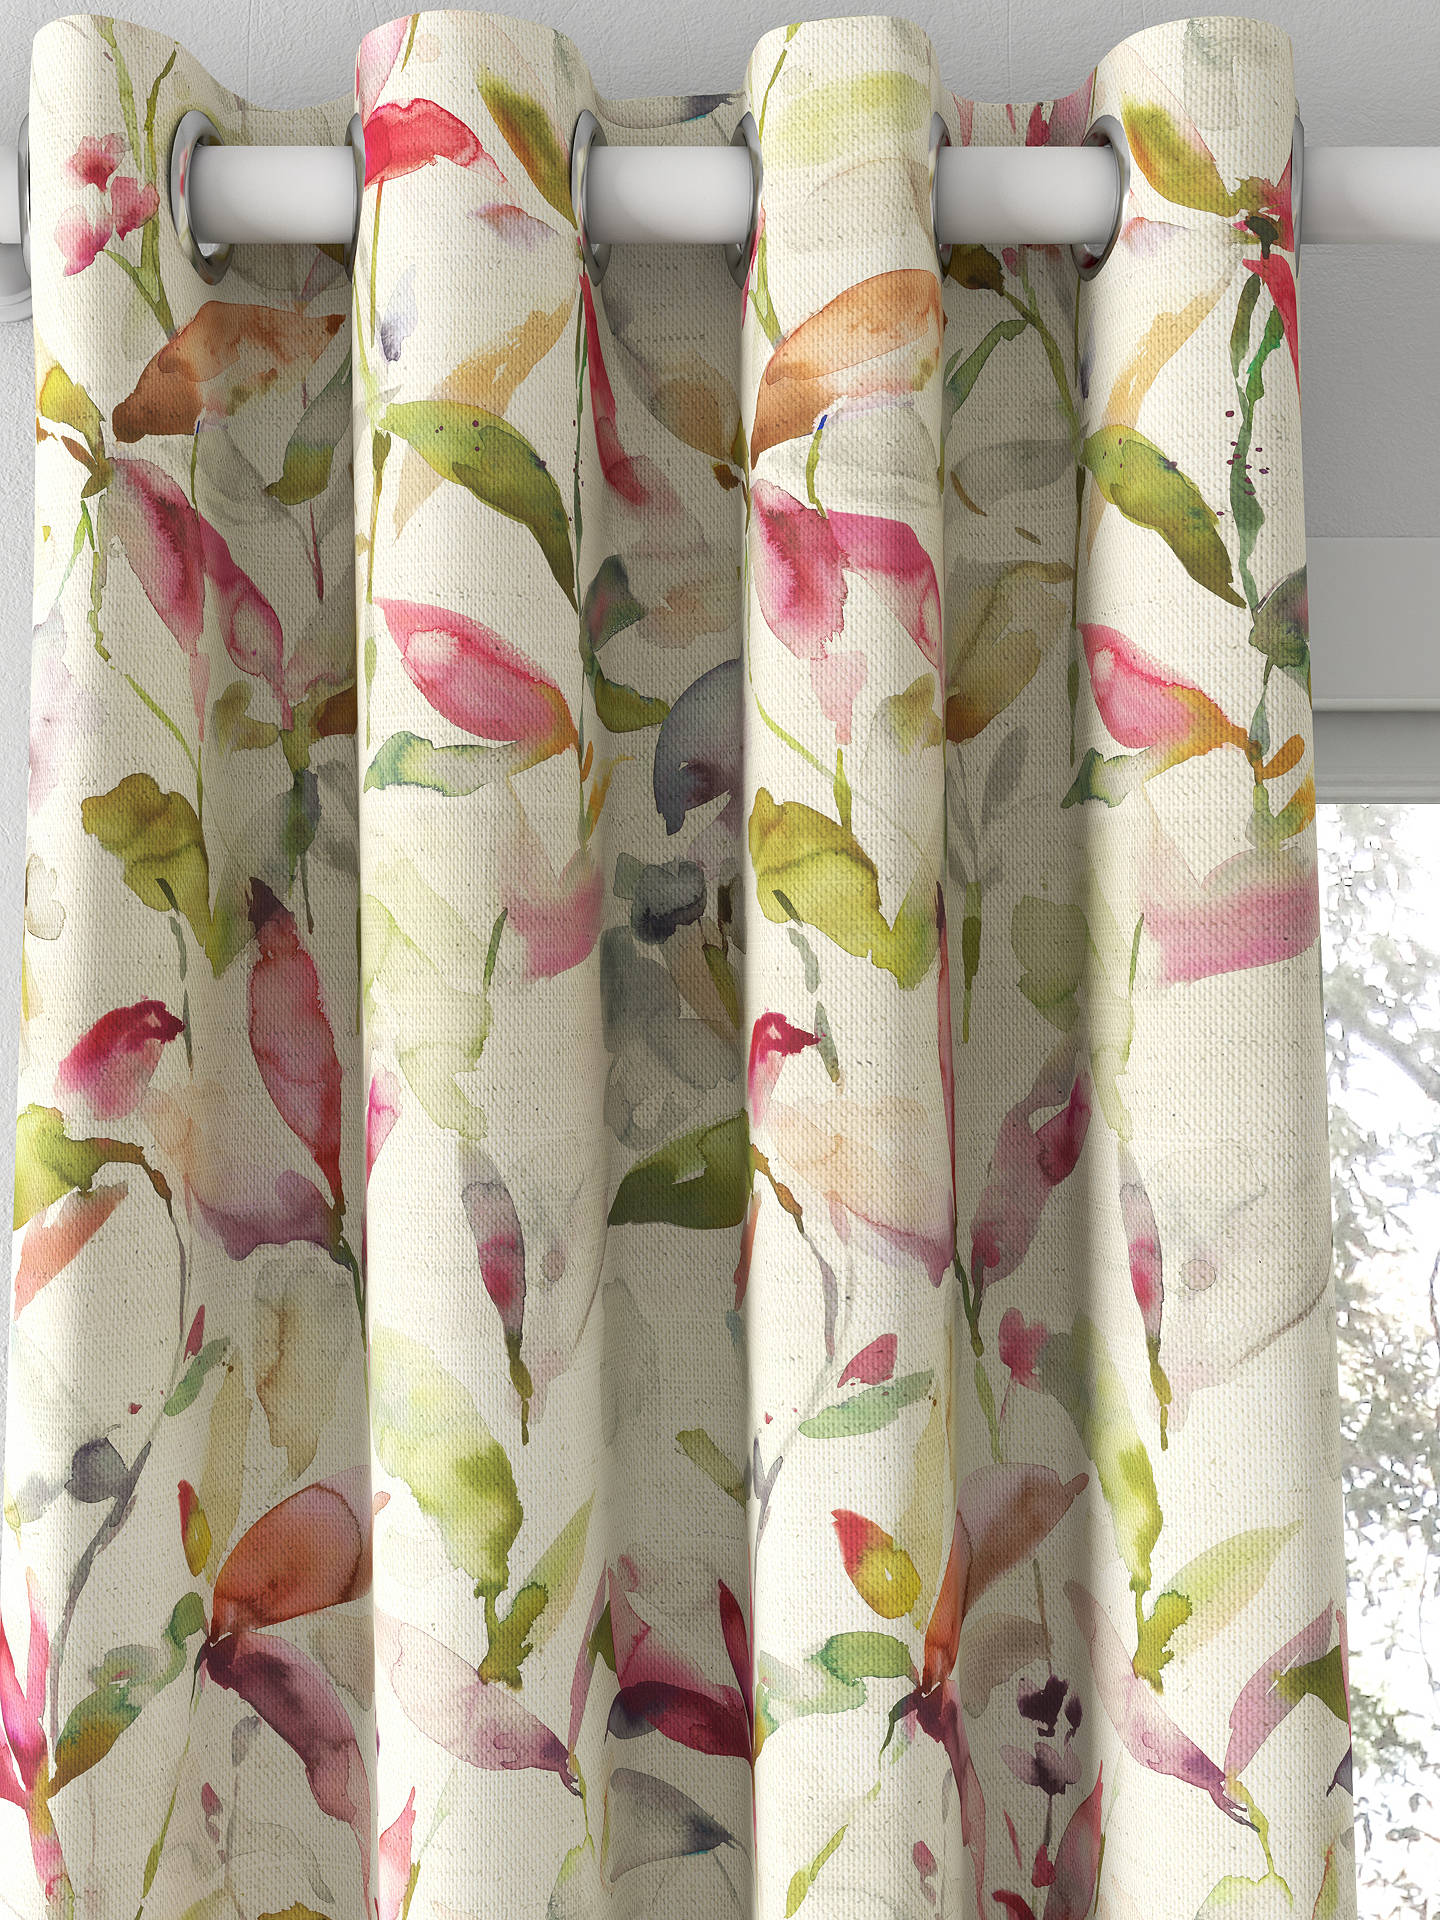 Voyage Naura Made to Measure Curtains, Poppy Natural